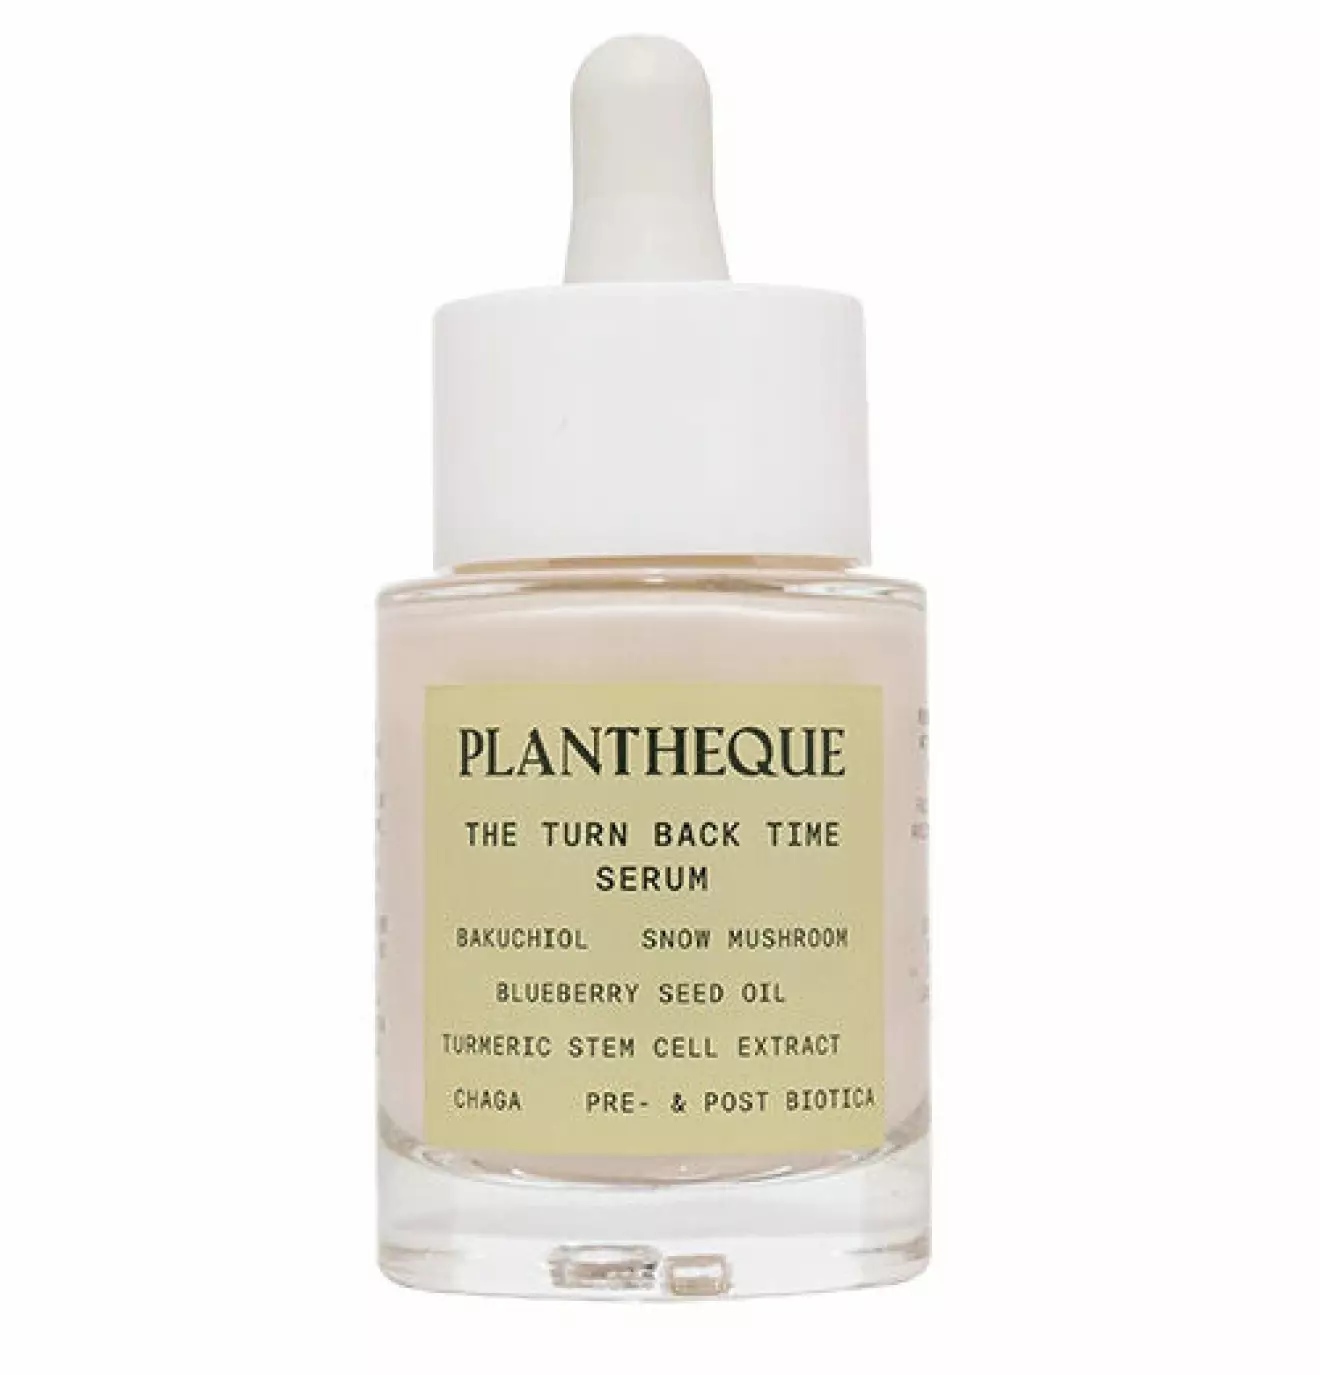 Plantheque The Turn Back Time Serum